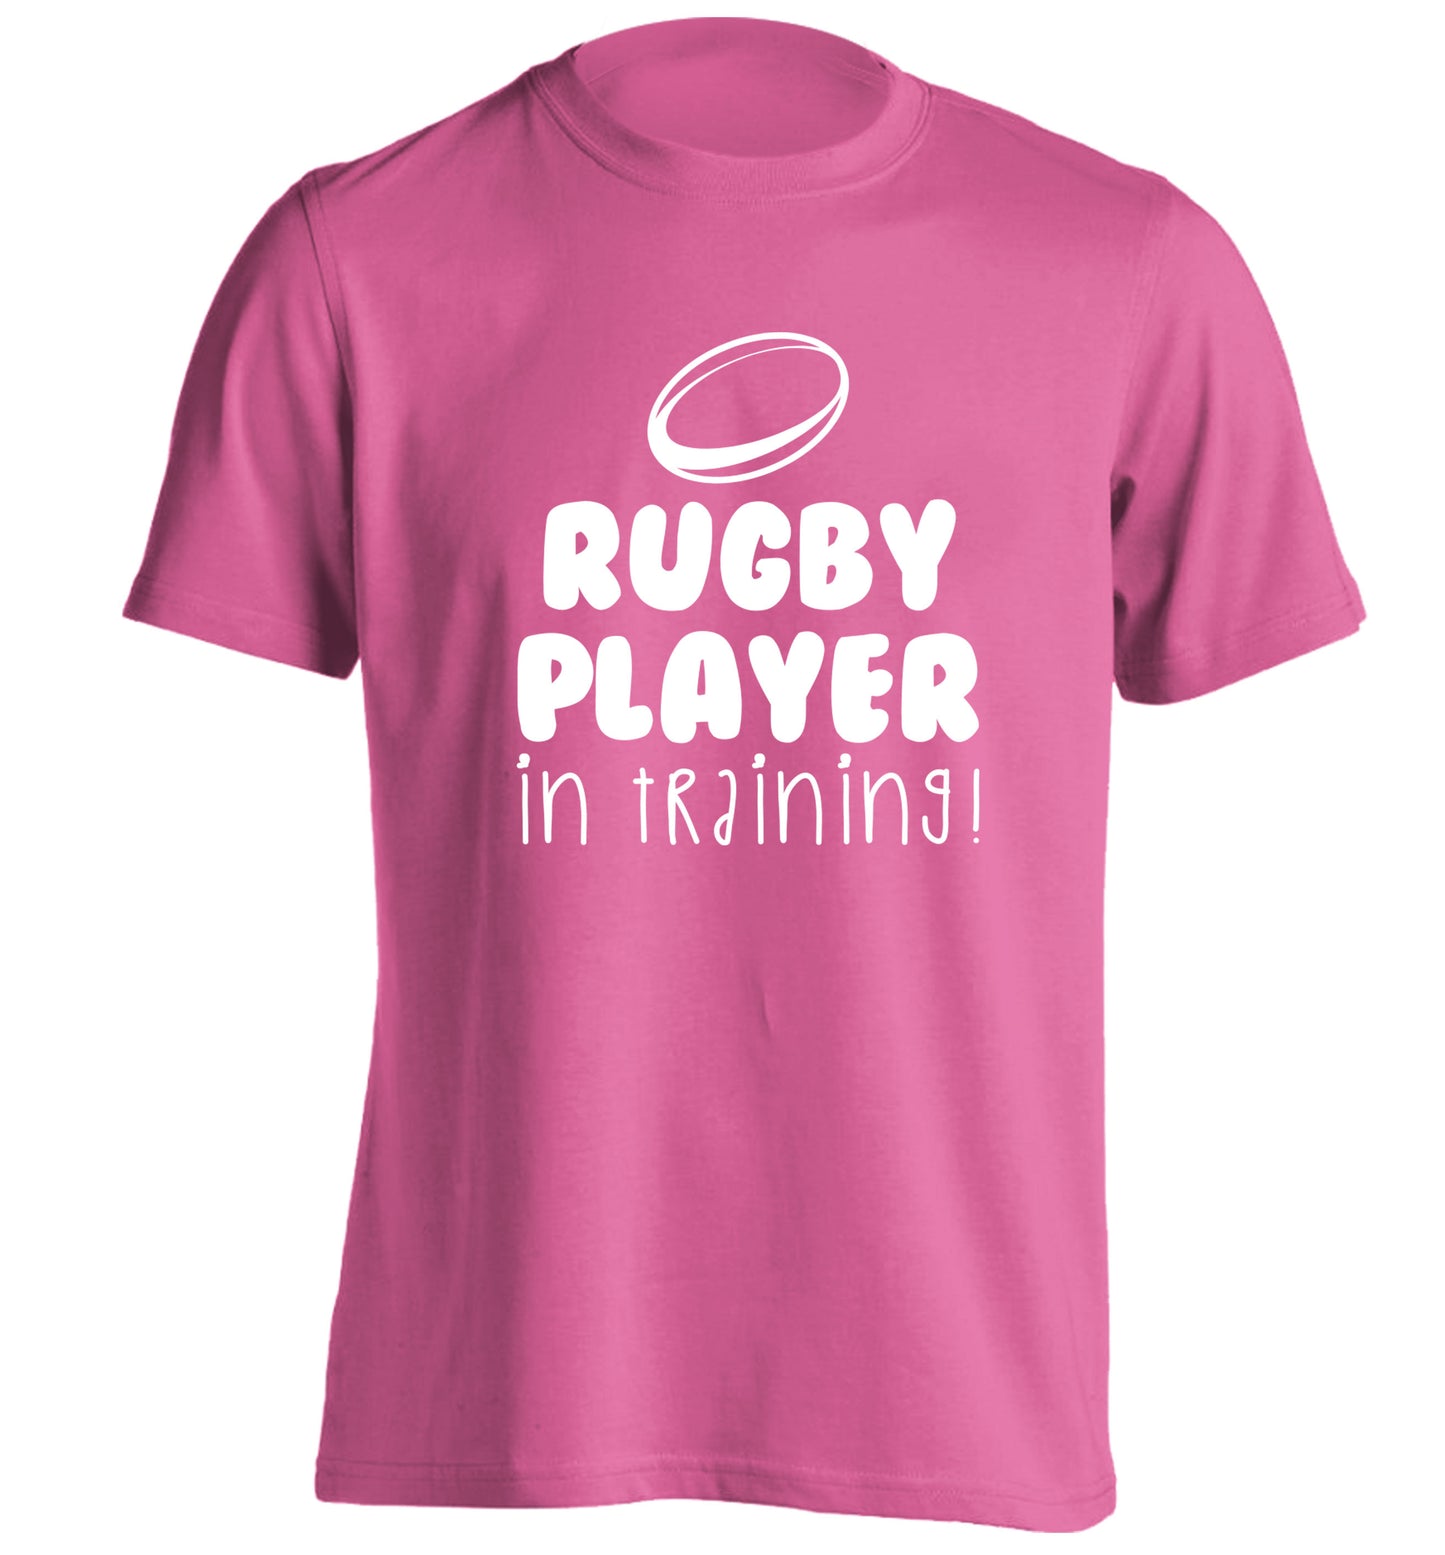 Rugby player in training adults unisex pink Tshirt 2XL